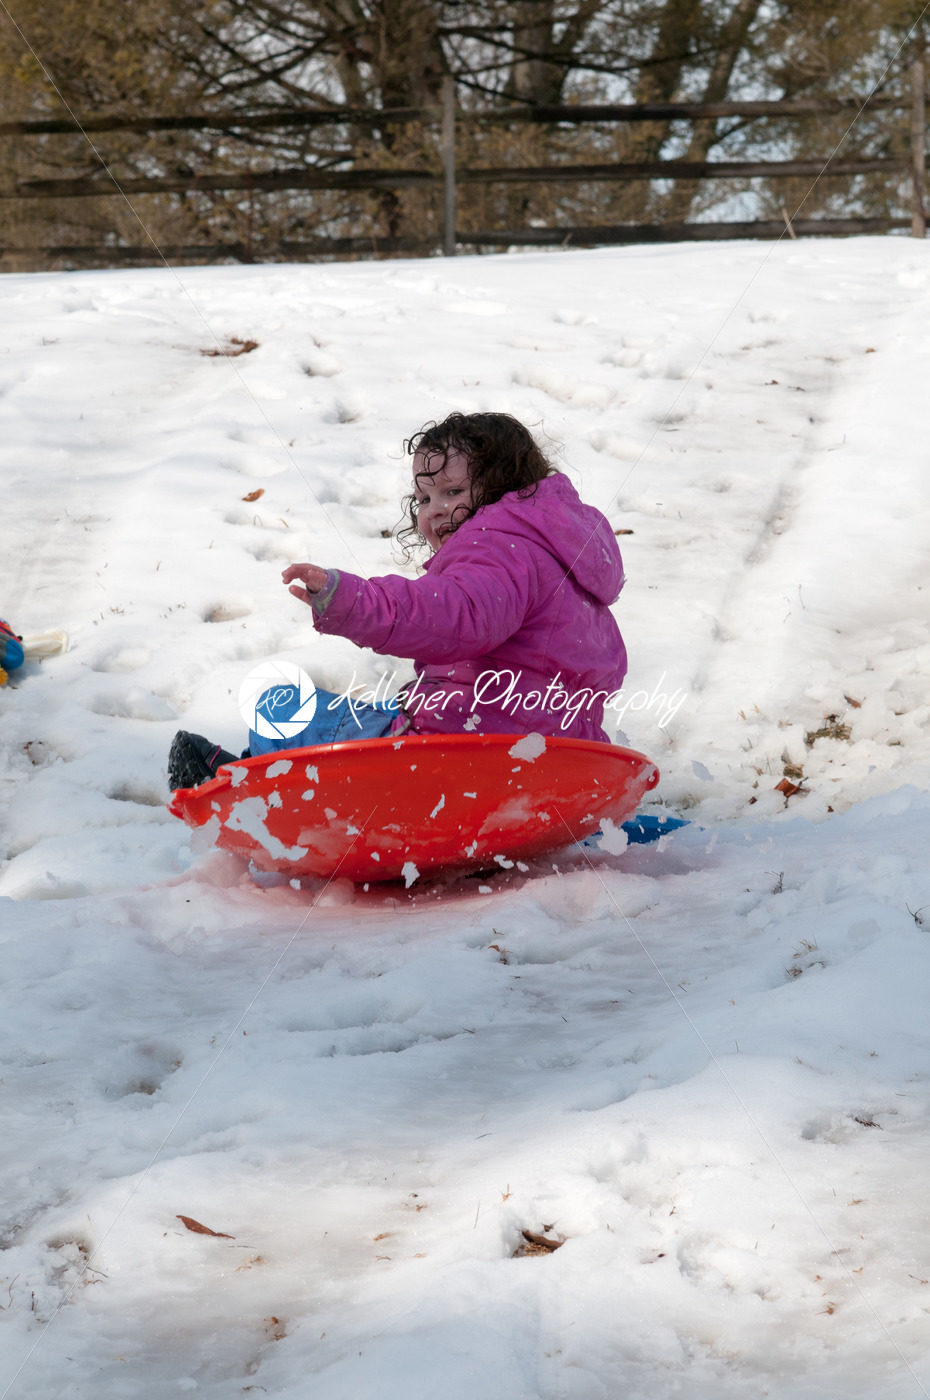 Young little girl enjoying sledding outside on a snow day - Kelleher Photography Store